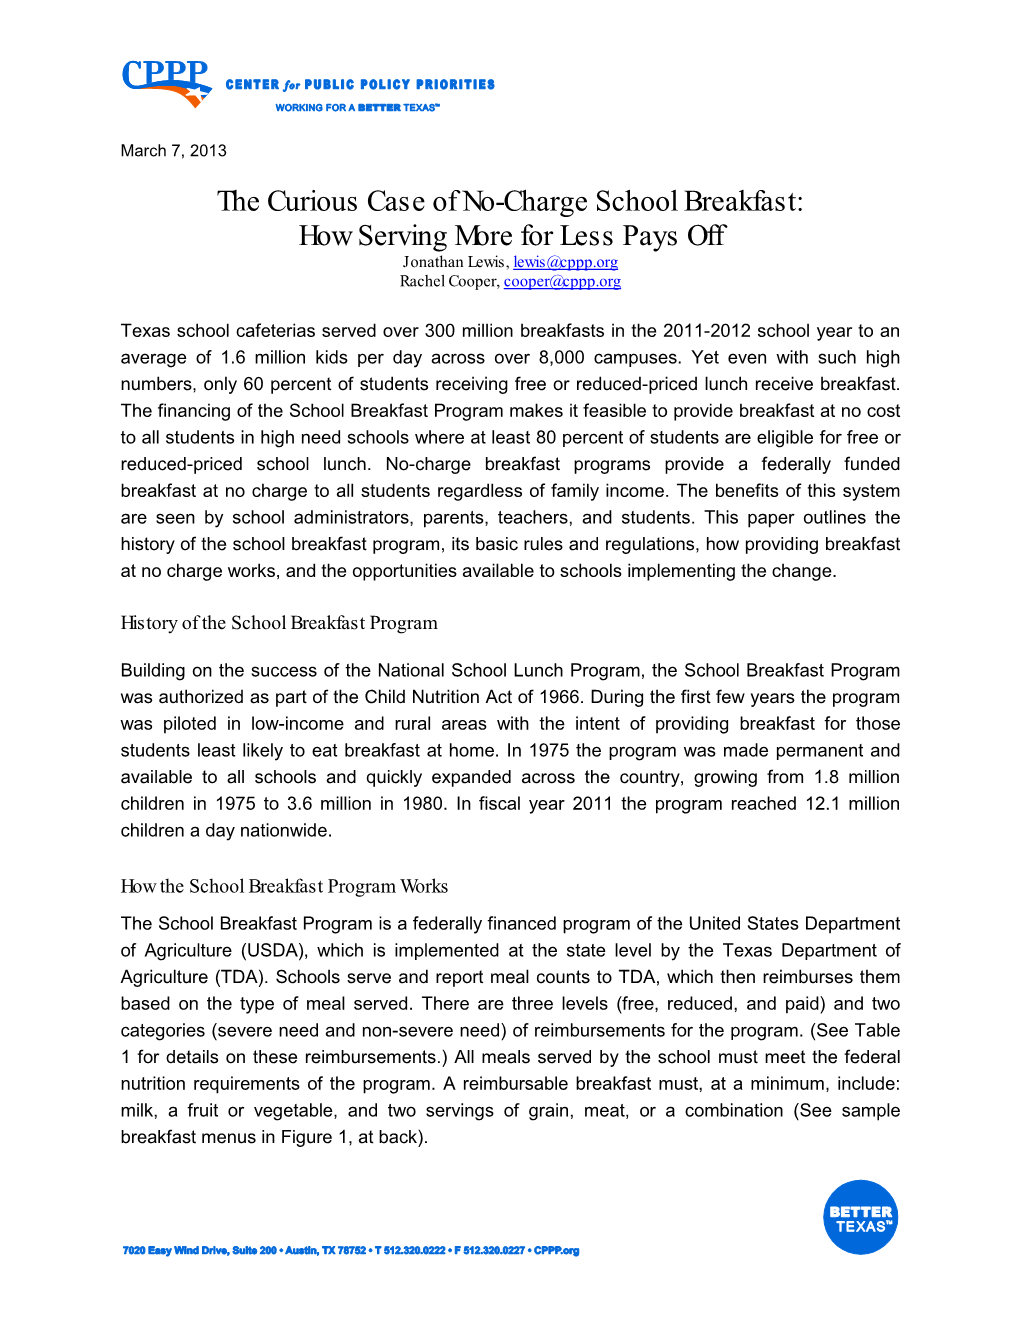 The Curious Case of No-Charge School Breakfast: How Serving More for Less Pays Off Jonathan Lewis, Lewis@Cppp.Org Rachel Cooper, Cooper@Cppp.Org